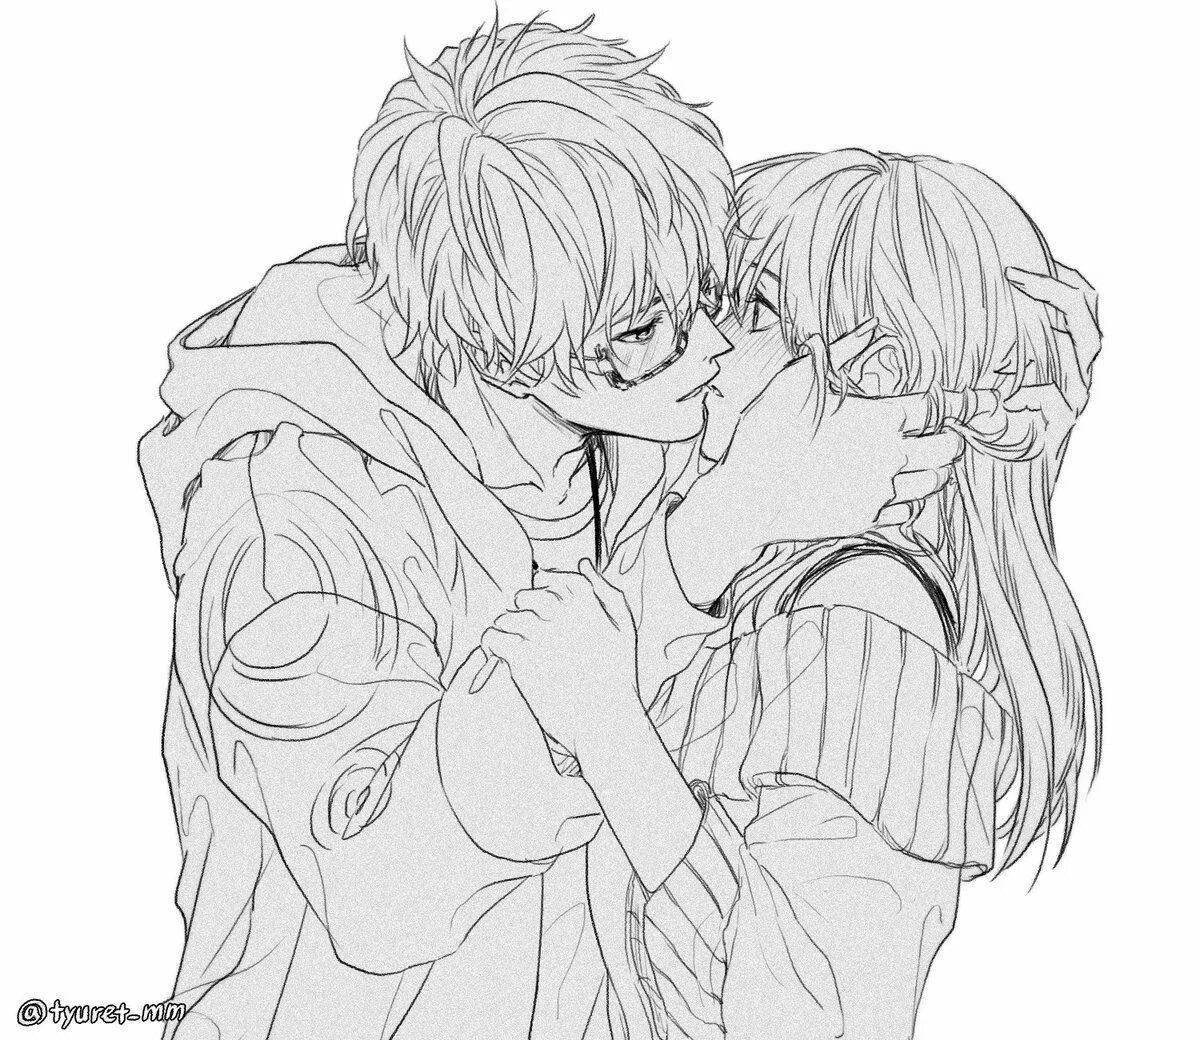 Cute anime couple coloring page